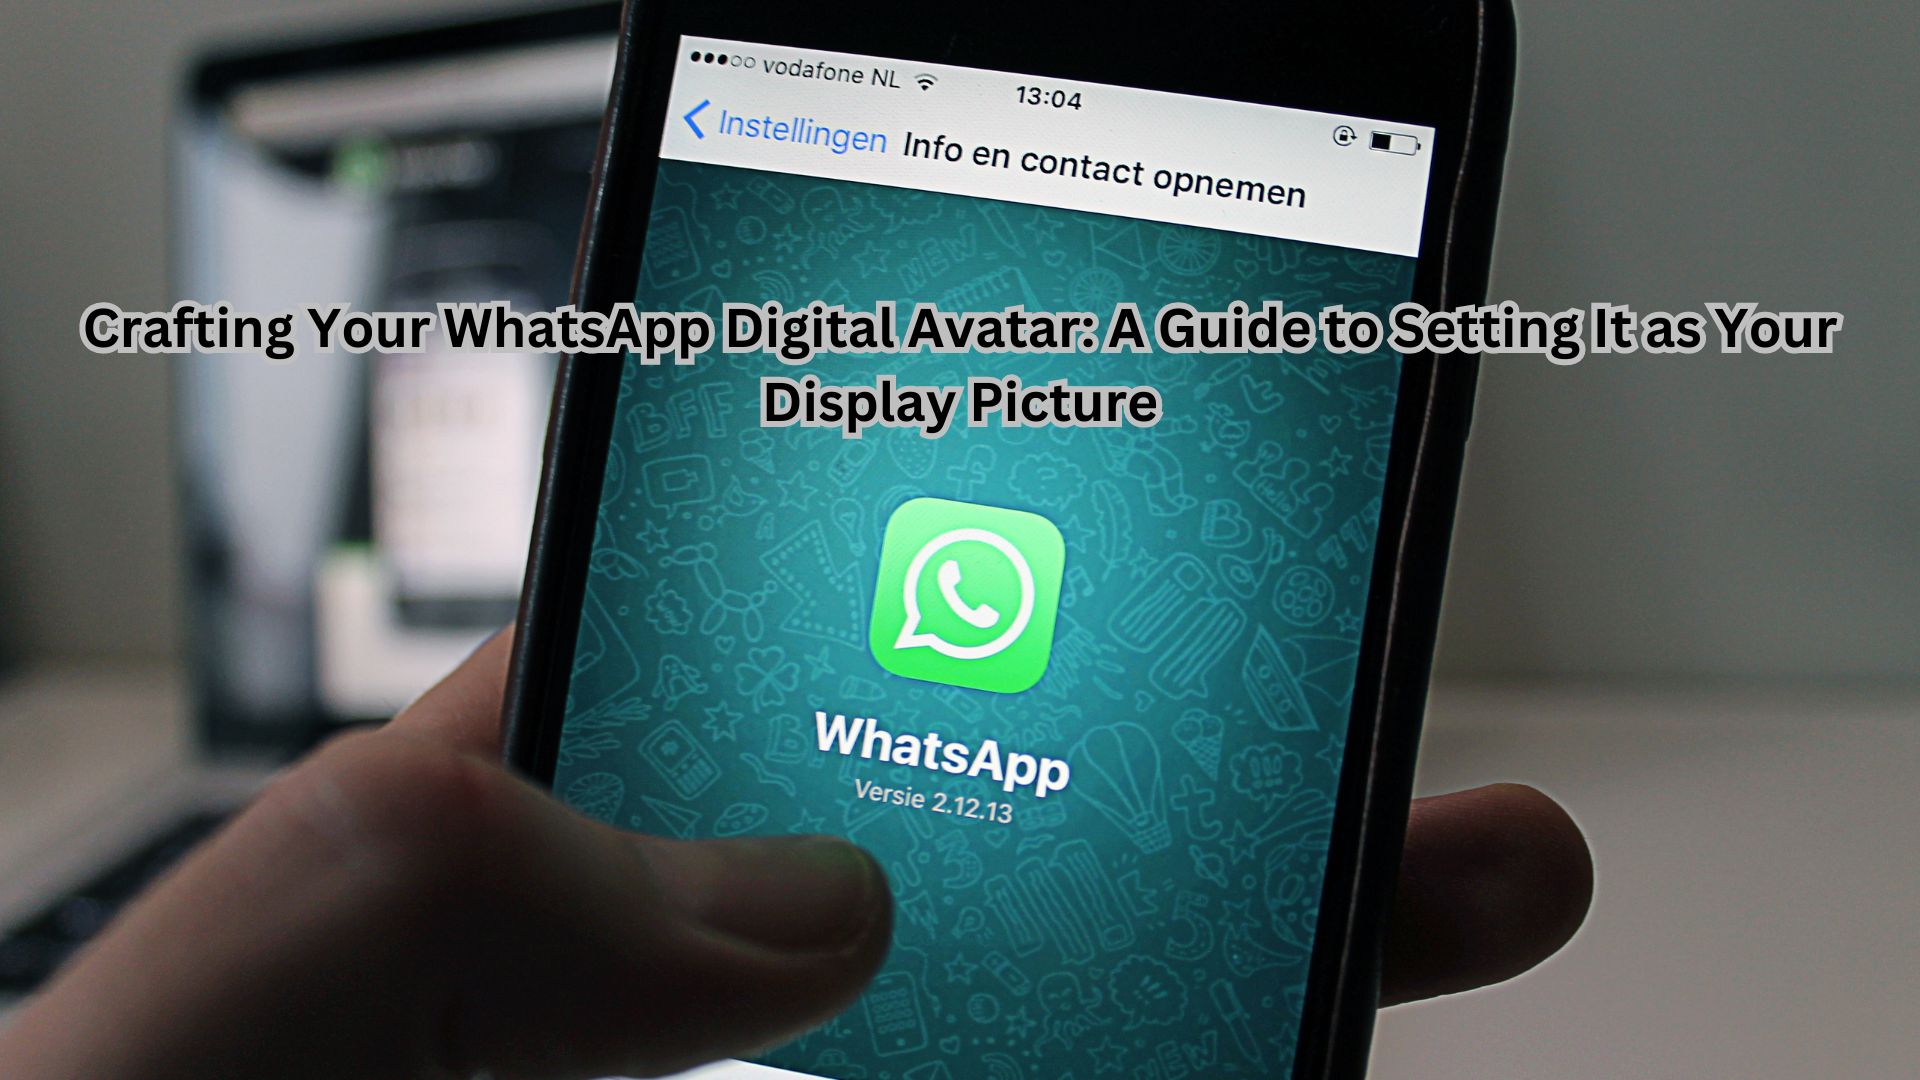 Crafting Your WhatsApp Digital Avatar: A Guide to Setting It as Your Display Picture